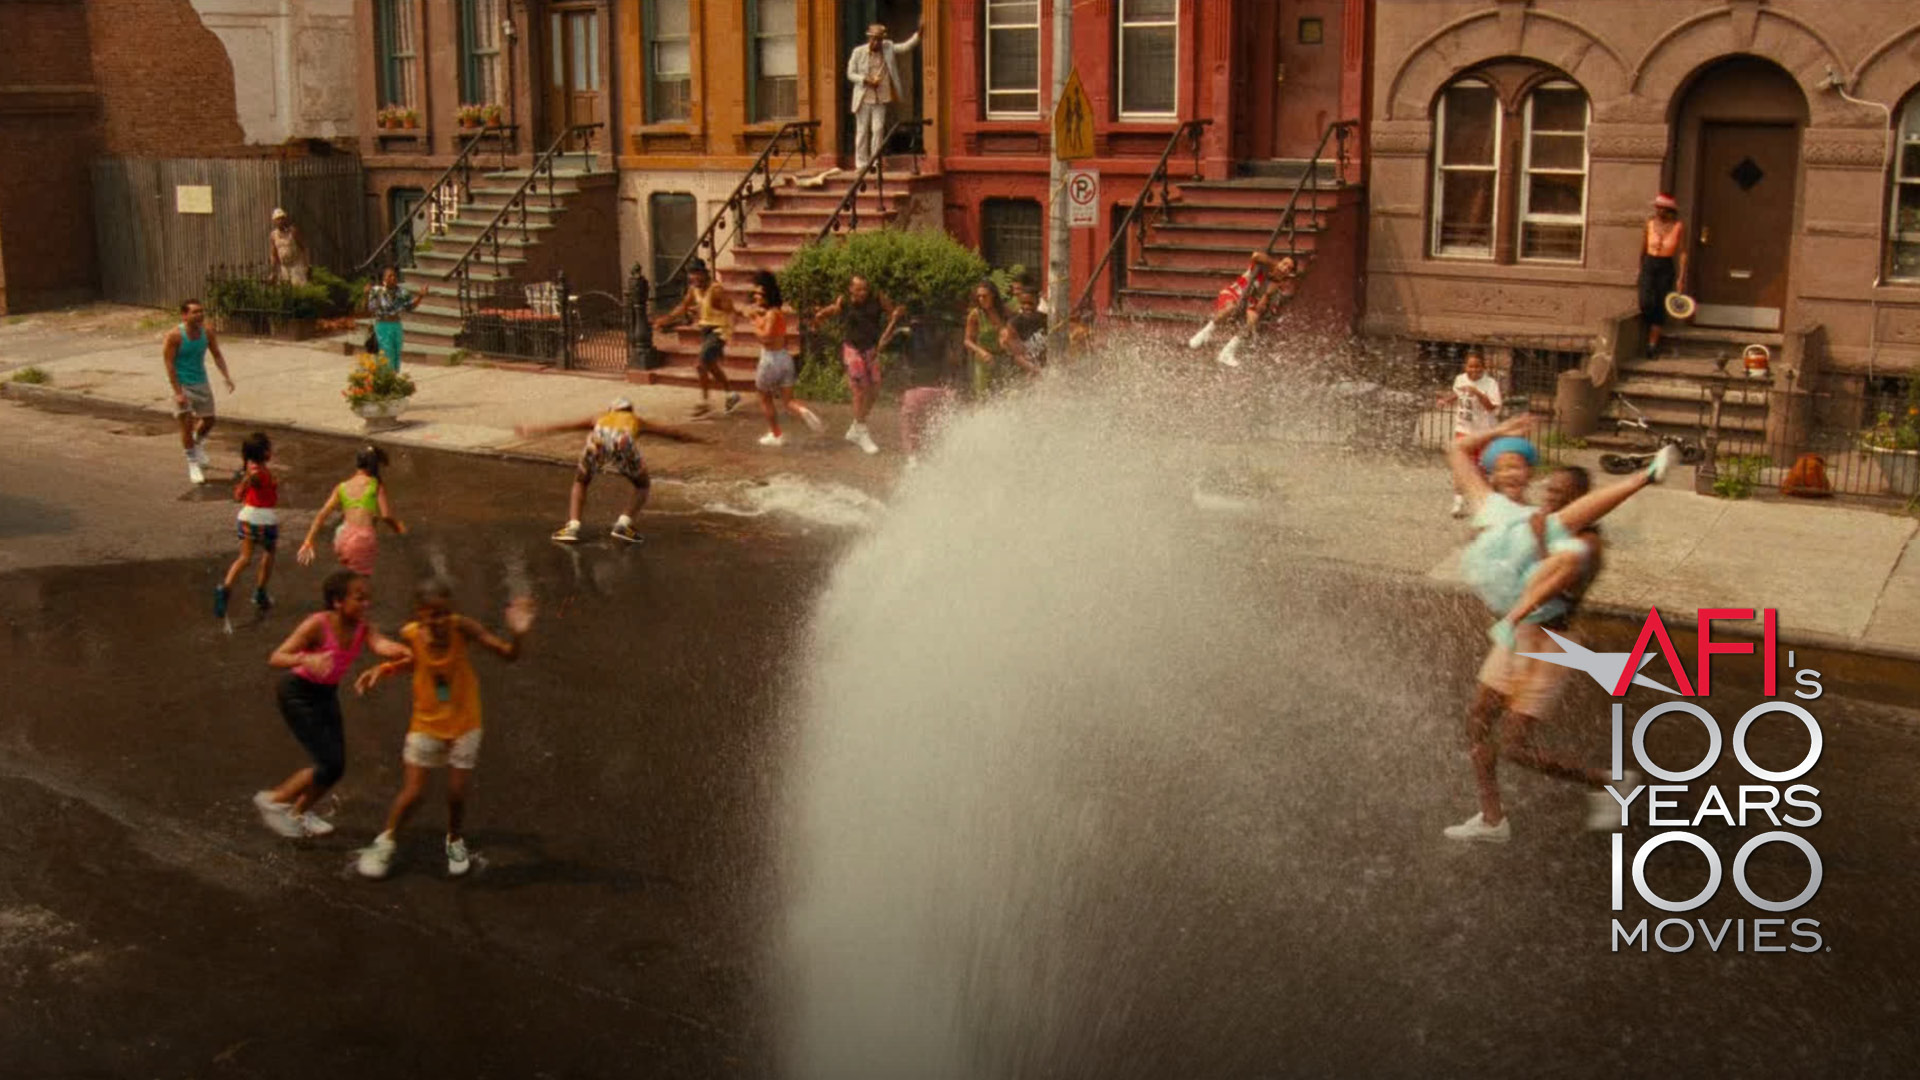 On the right corner is the AFI 100 YEARS...1000 MOVIES logo. Film still from DO THE RIGHT THING: On a blistering hot summer day in Brooklyn, residents of a brownstone-lined street play in the water shooting our from a fire hydrant.